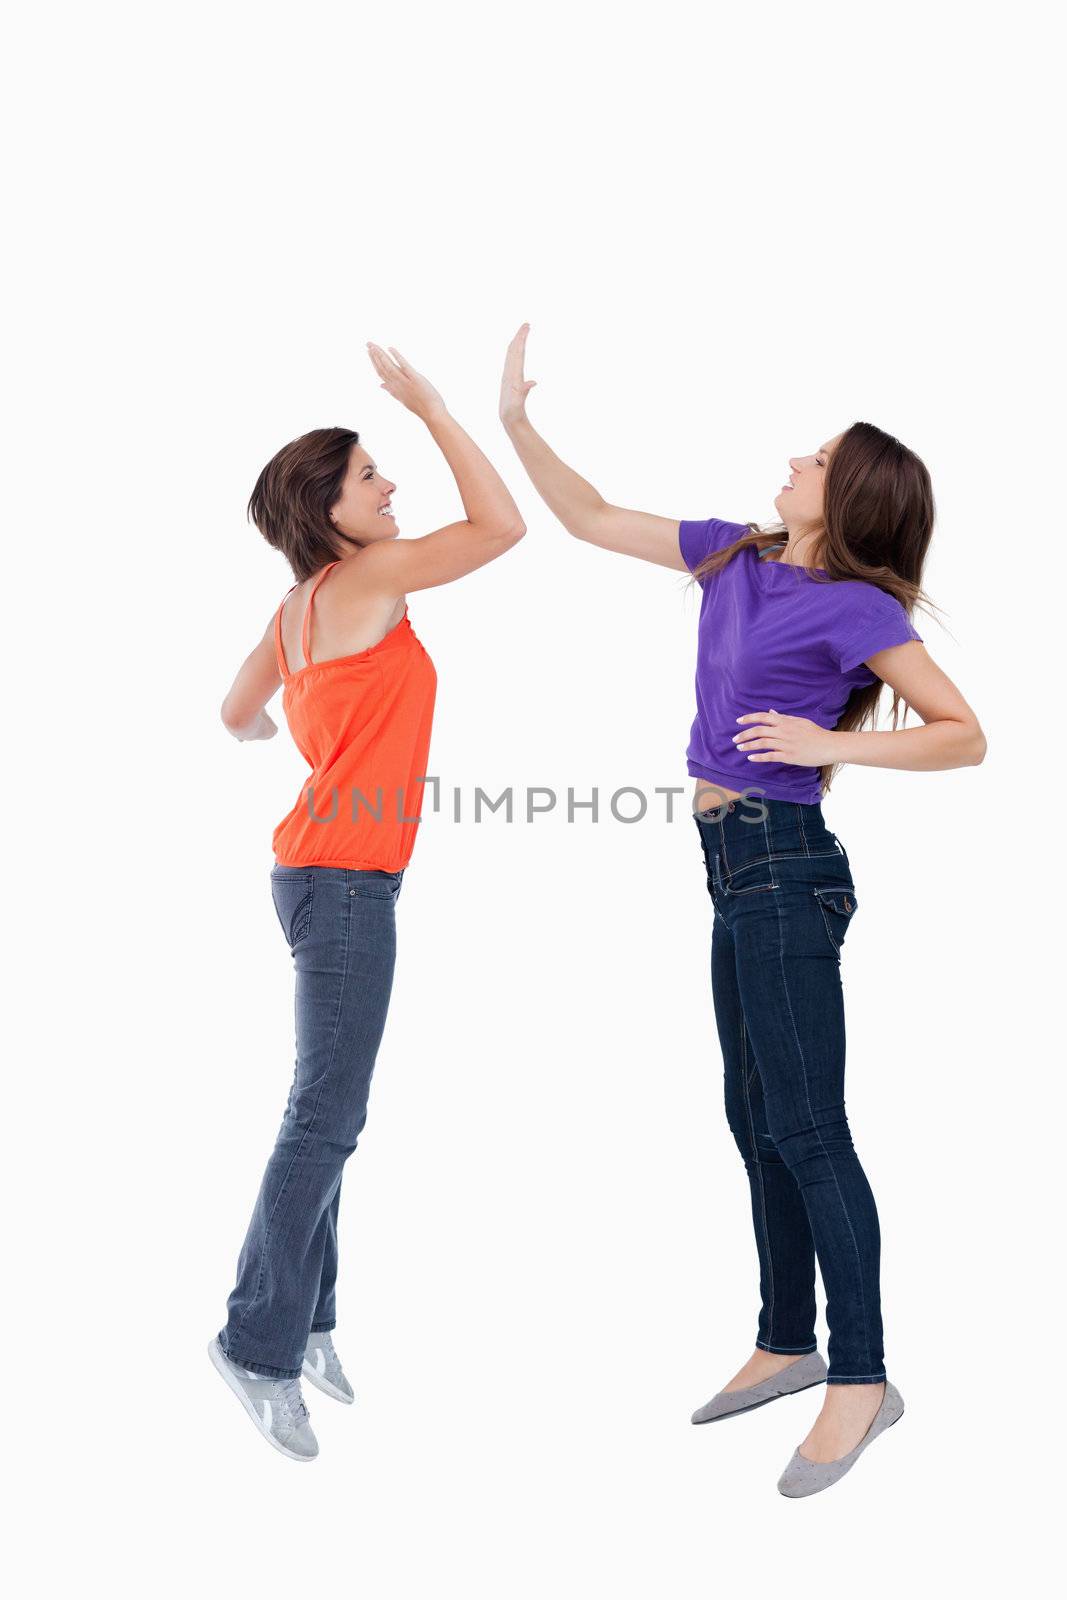 Smiling and dynamic teenagers jumping while giving a high-five